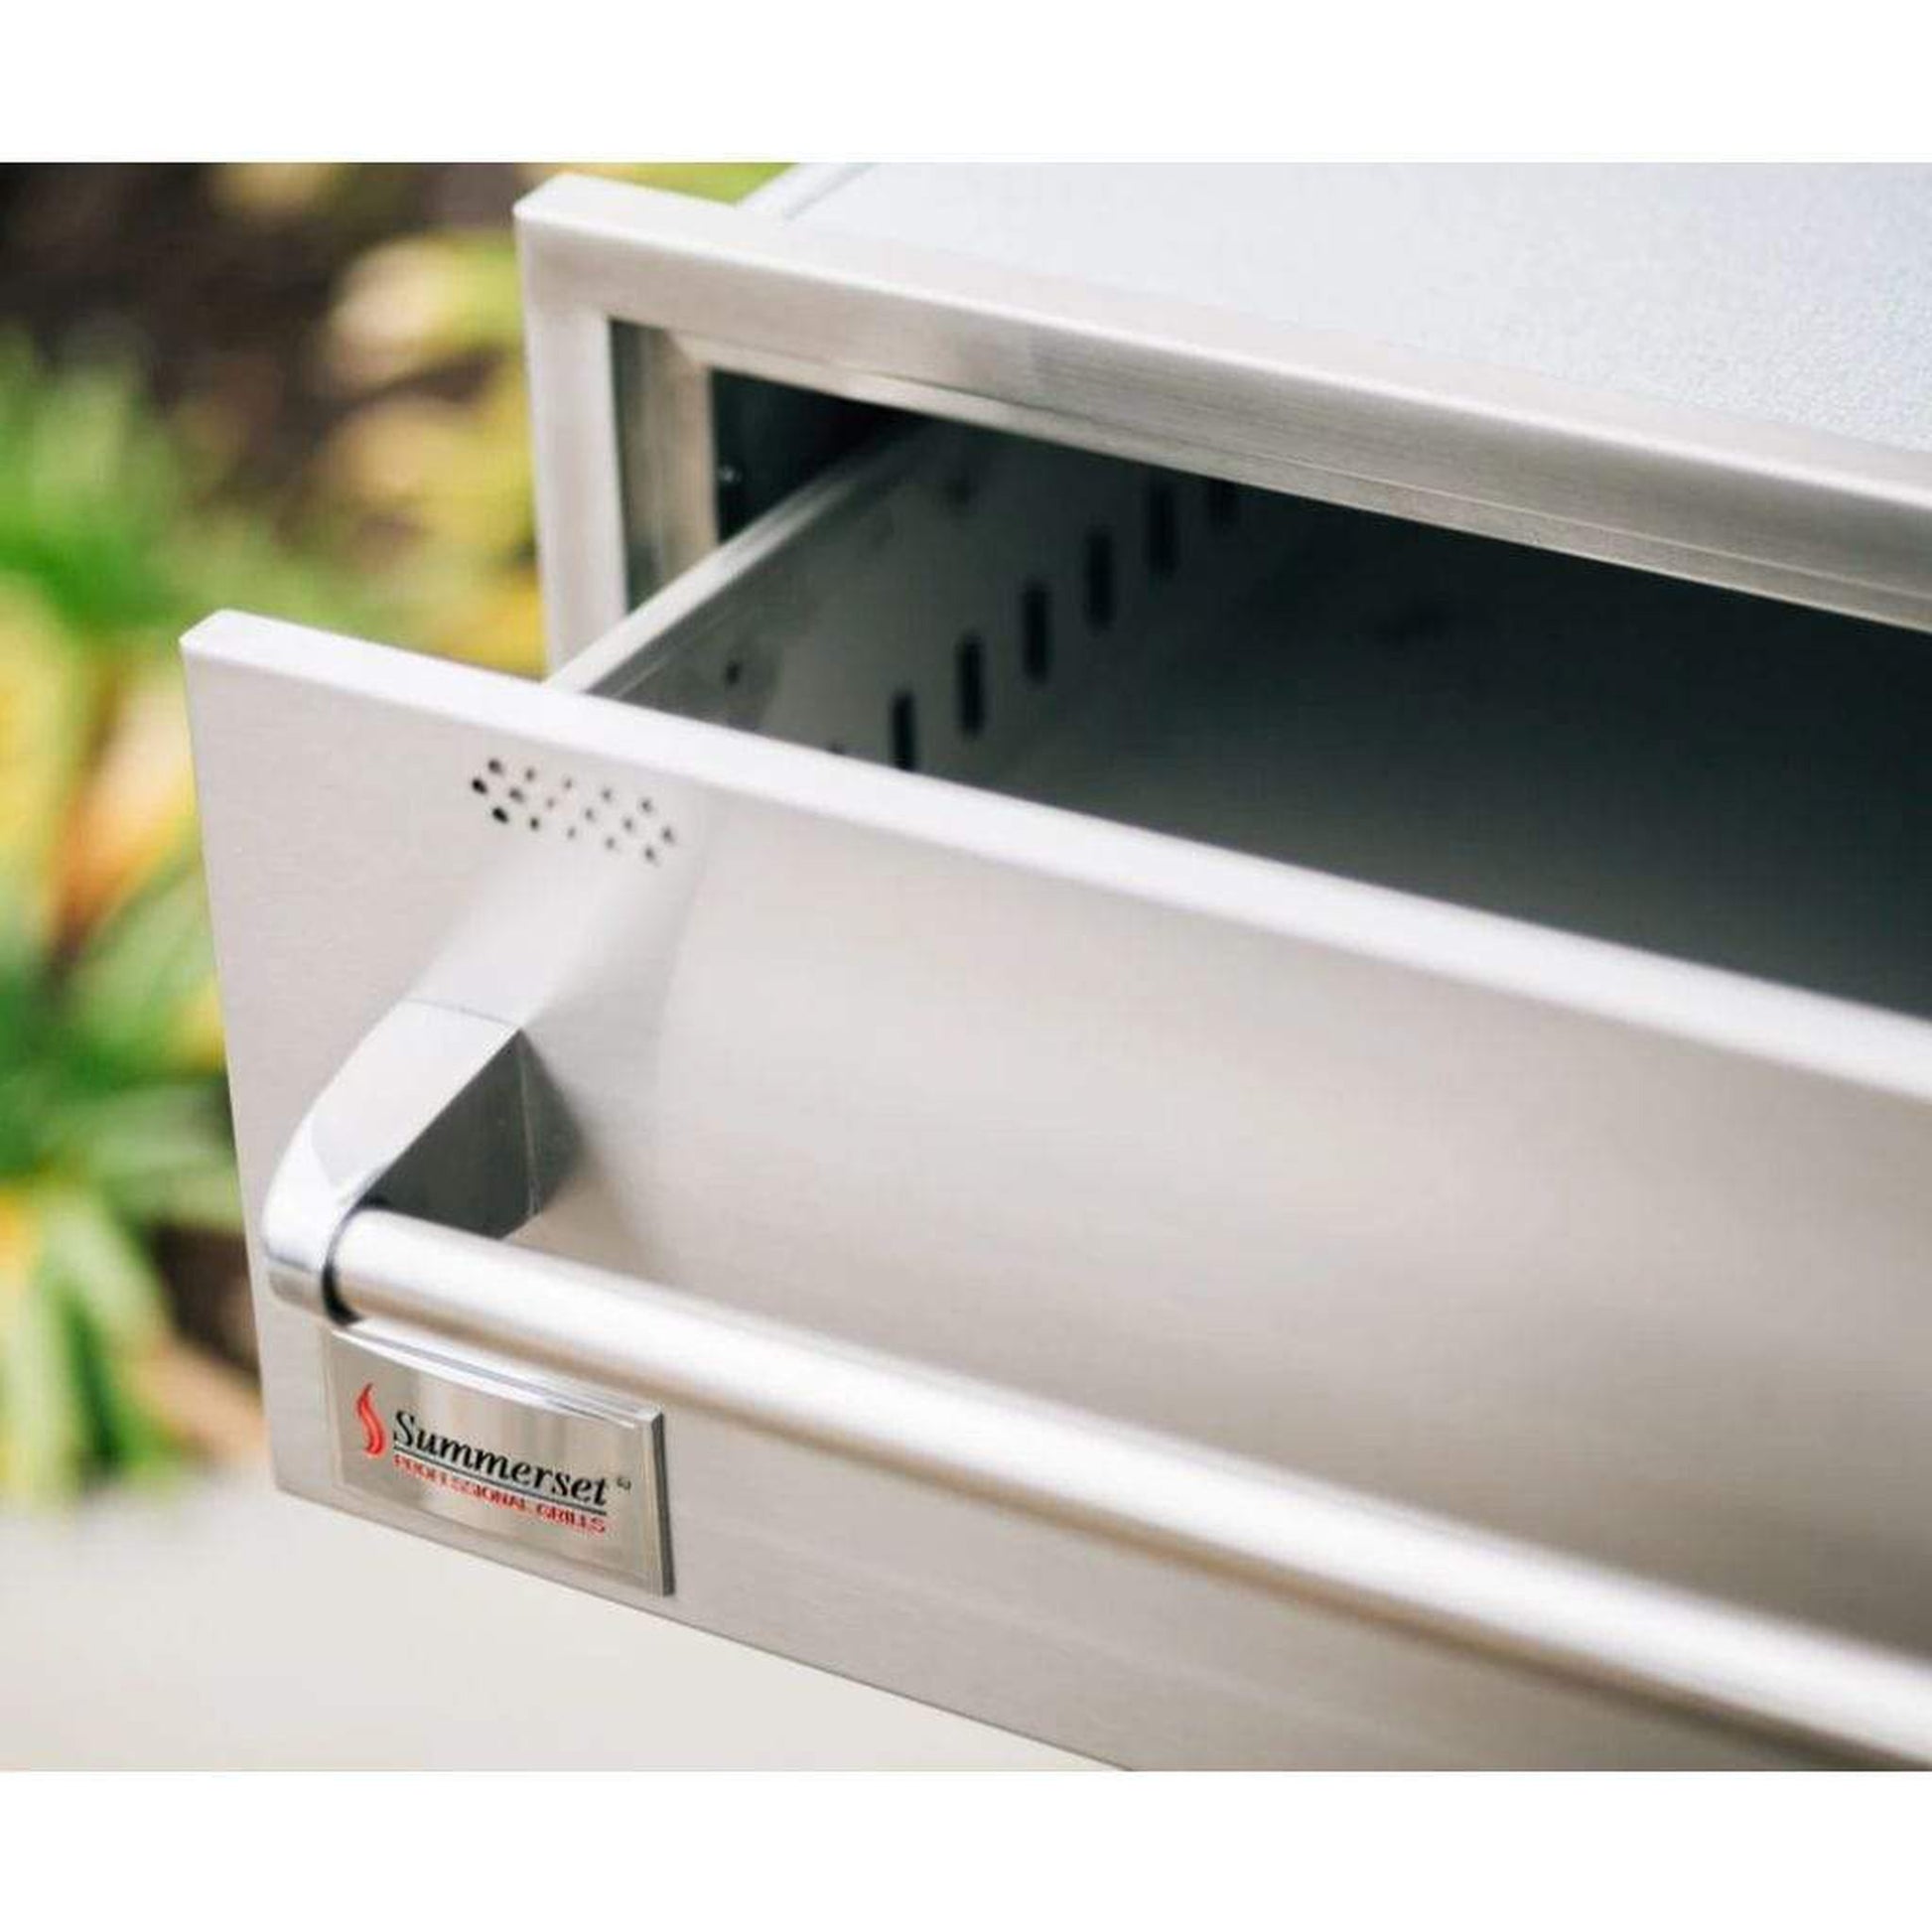 Summerset 36" Stainless Steel Built-In 120V Outdoor Electric Warming Drawer